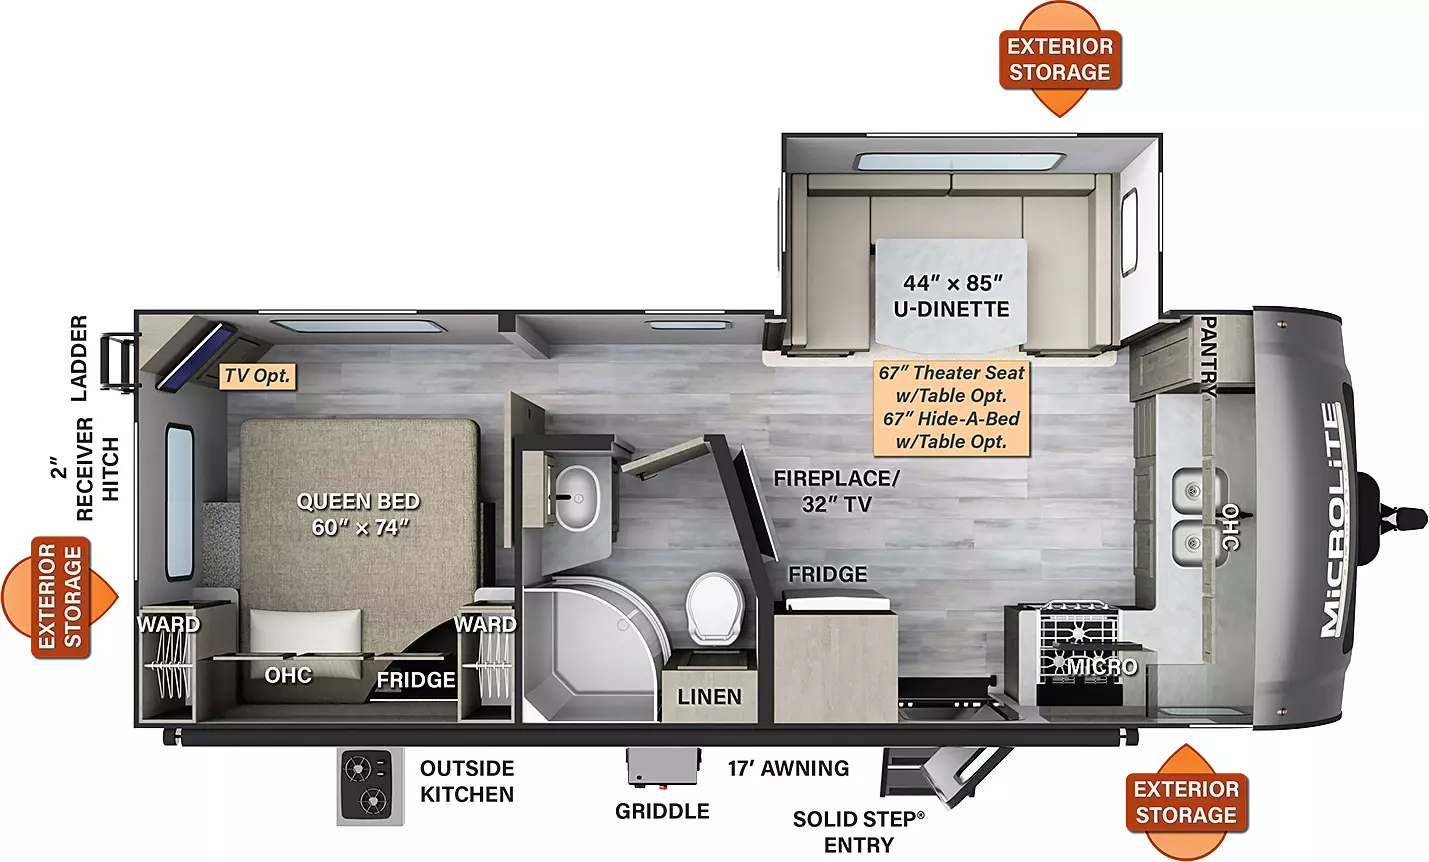 The 25FKS has one slide out on the off-door slide along with one entry door. Exterior features include a 17 foot awning, outside kitchen, front exterior storage on both sides, griddle, rear exterior storage, rear ladder, and 2 inch receiver hitch. Interior layout from front to back: front kitchen living area with pantry, double sinks, stove, microwave, and refrigerator; angled wall with TV and fireplace below; off-door side slide out containing U-dinette (theater seating or hide-a-bed optional); side aisle bathroom; rear bedroom with queen bed, overhead cabinets, and wardrobes on either side (optional TV). 